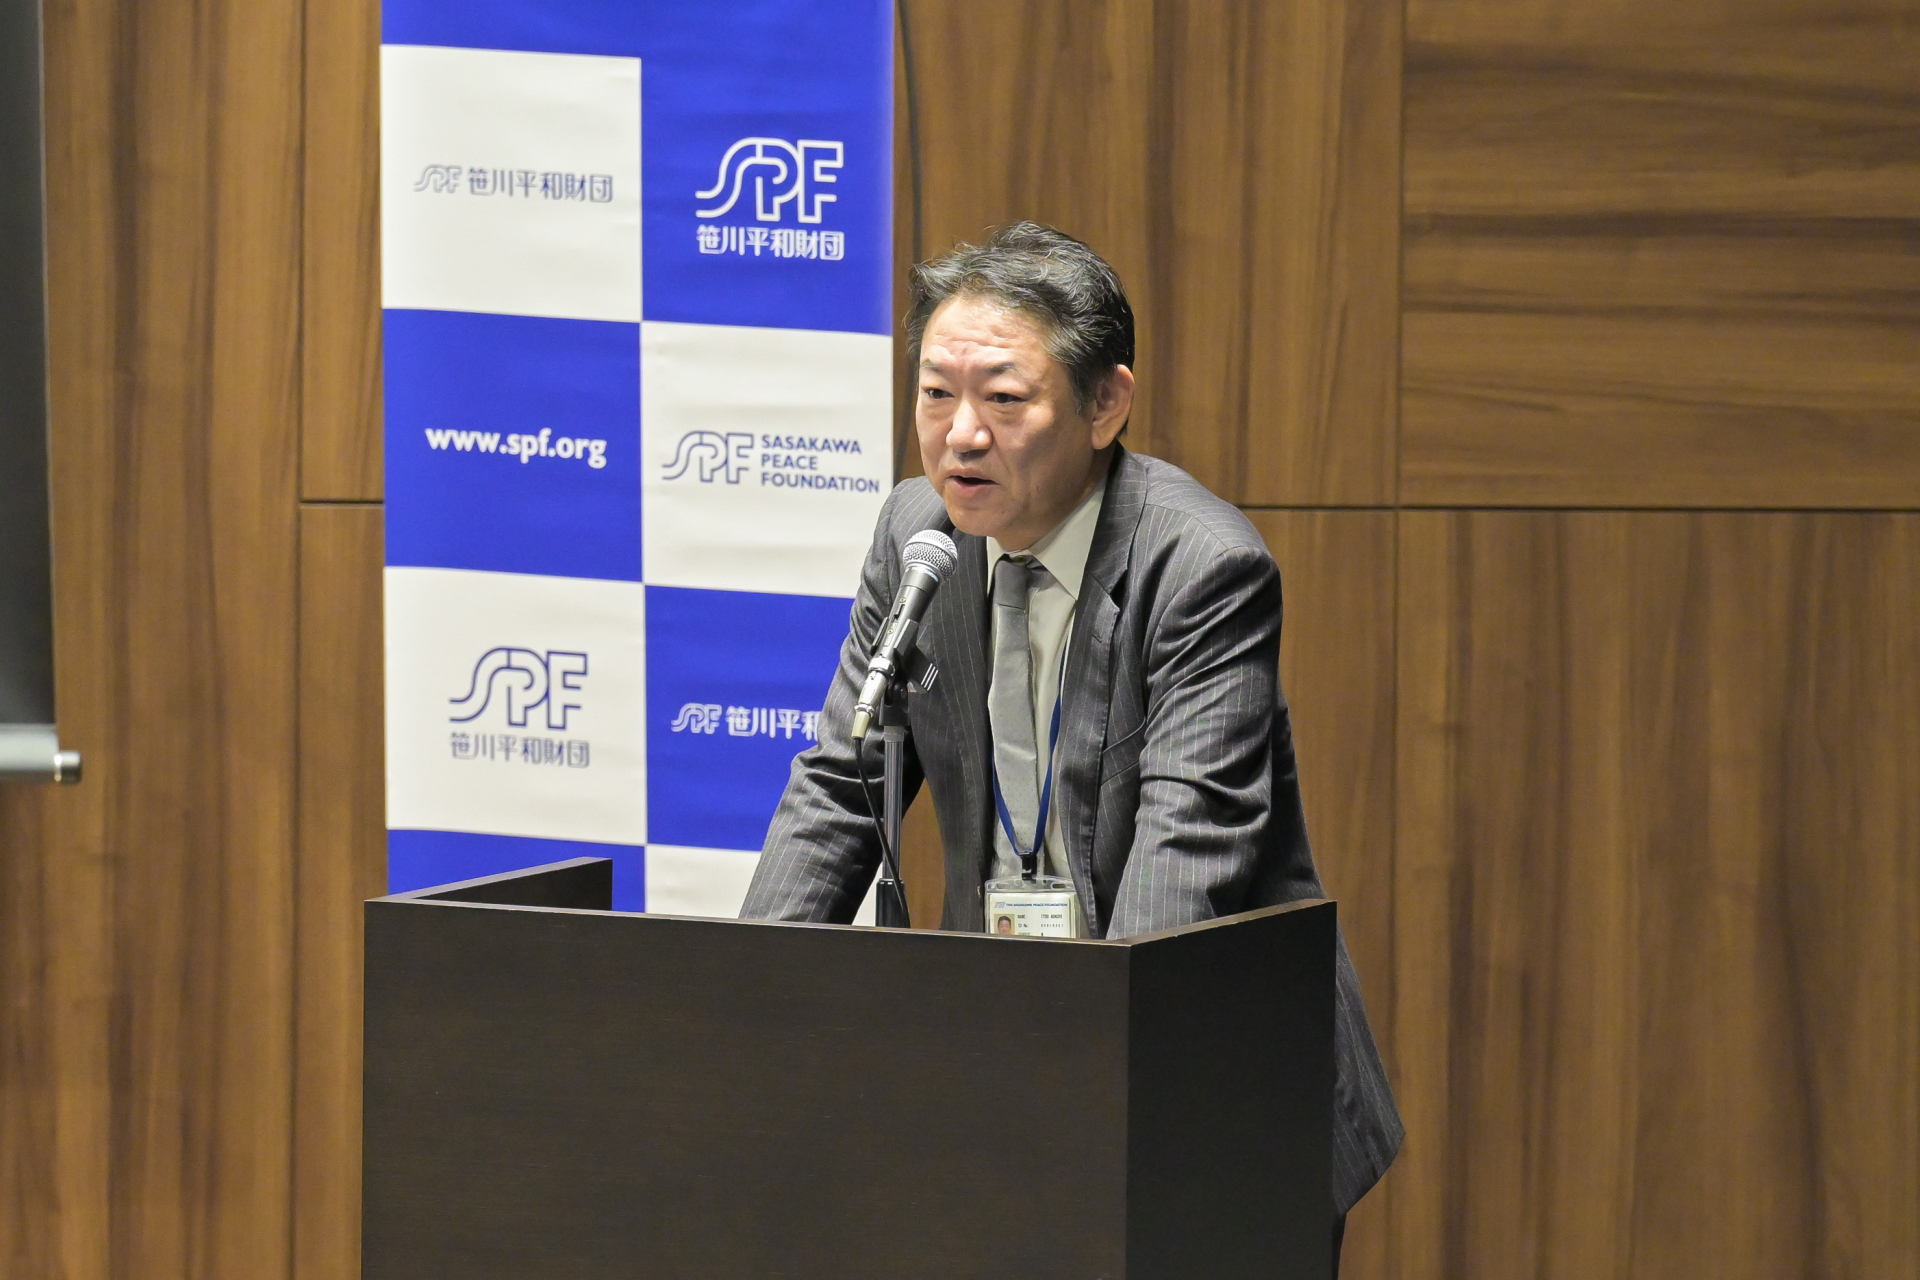 SPF Executive Director Itsu Adachi introduces several SPF initiatives that support better multicultural understanding in Asia and Japan.